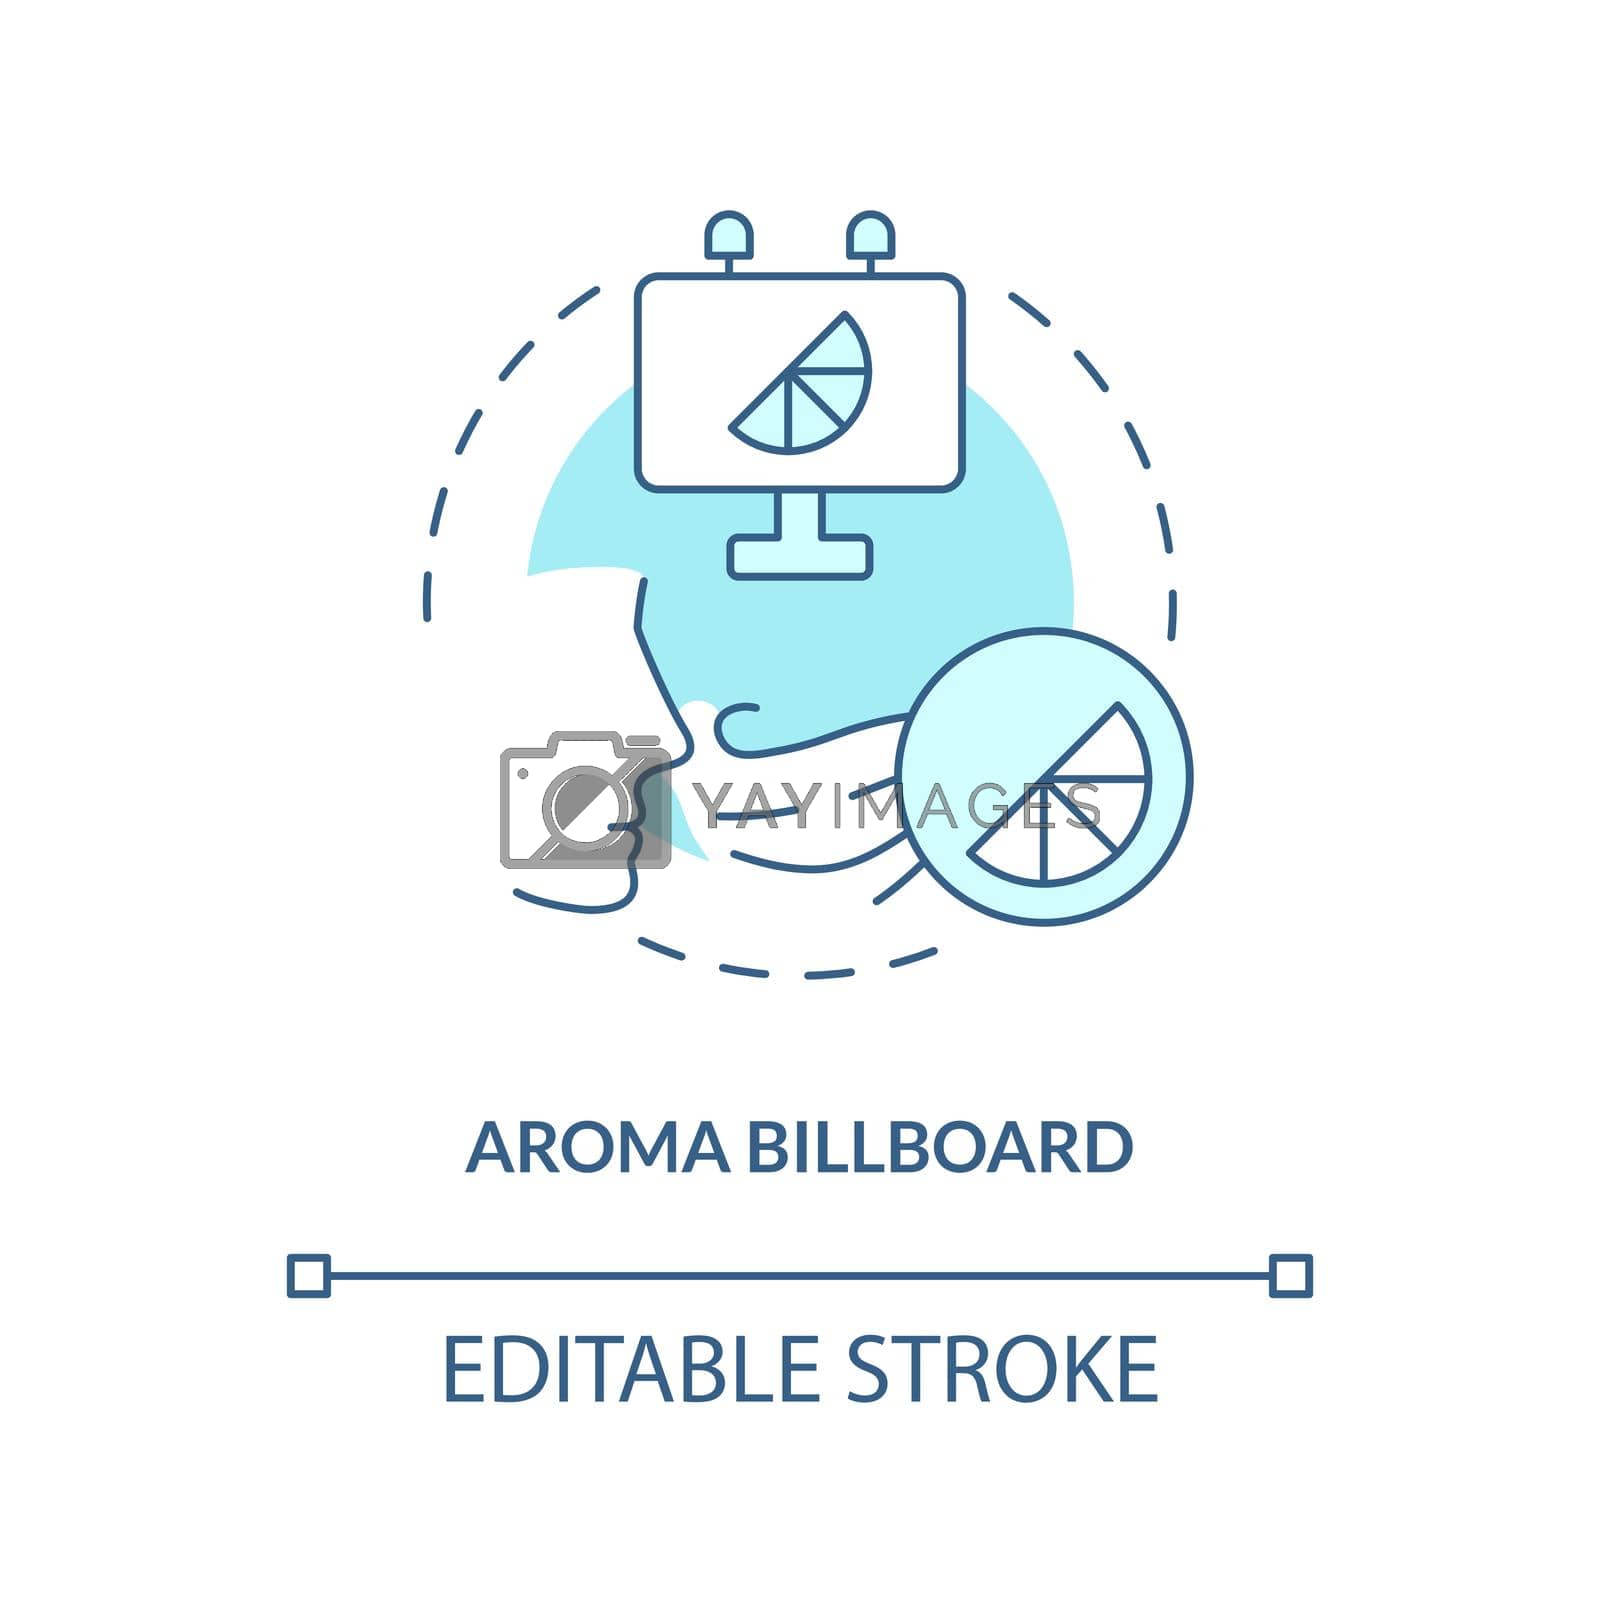 Royalty free image of Aroma billboard turquoise concept icon by bsd studio